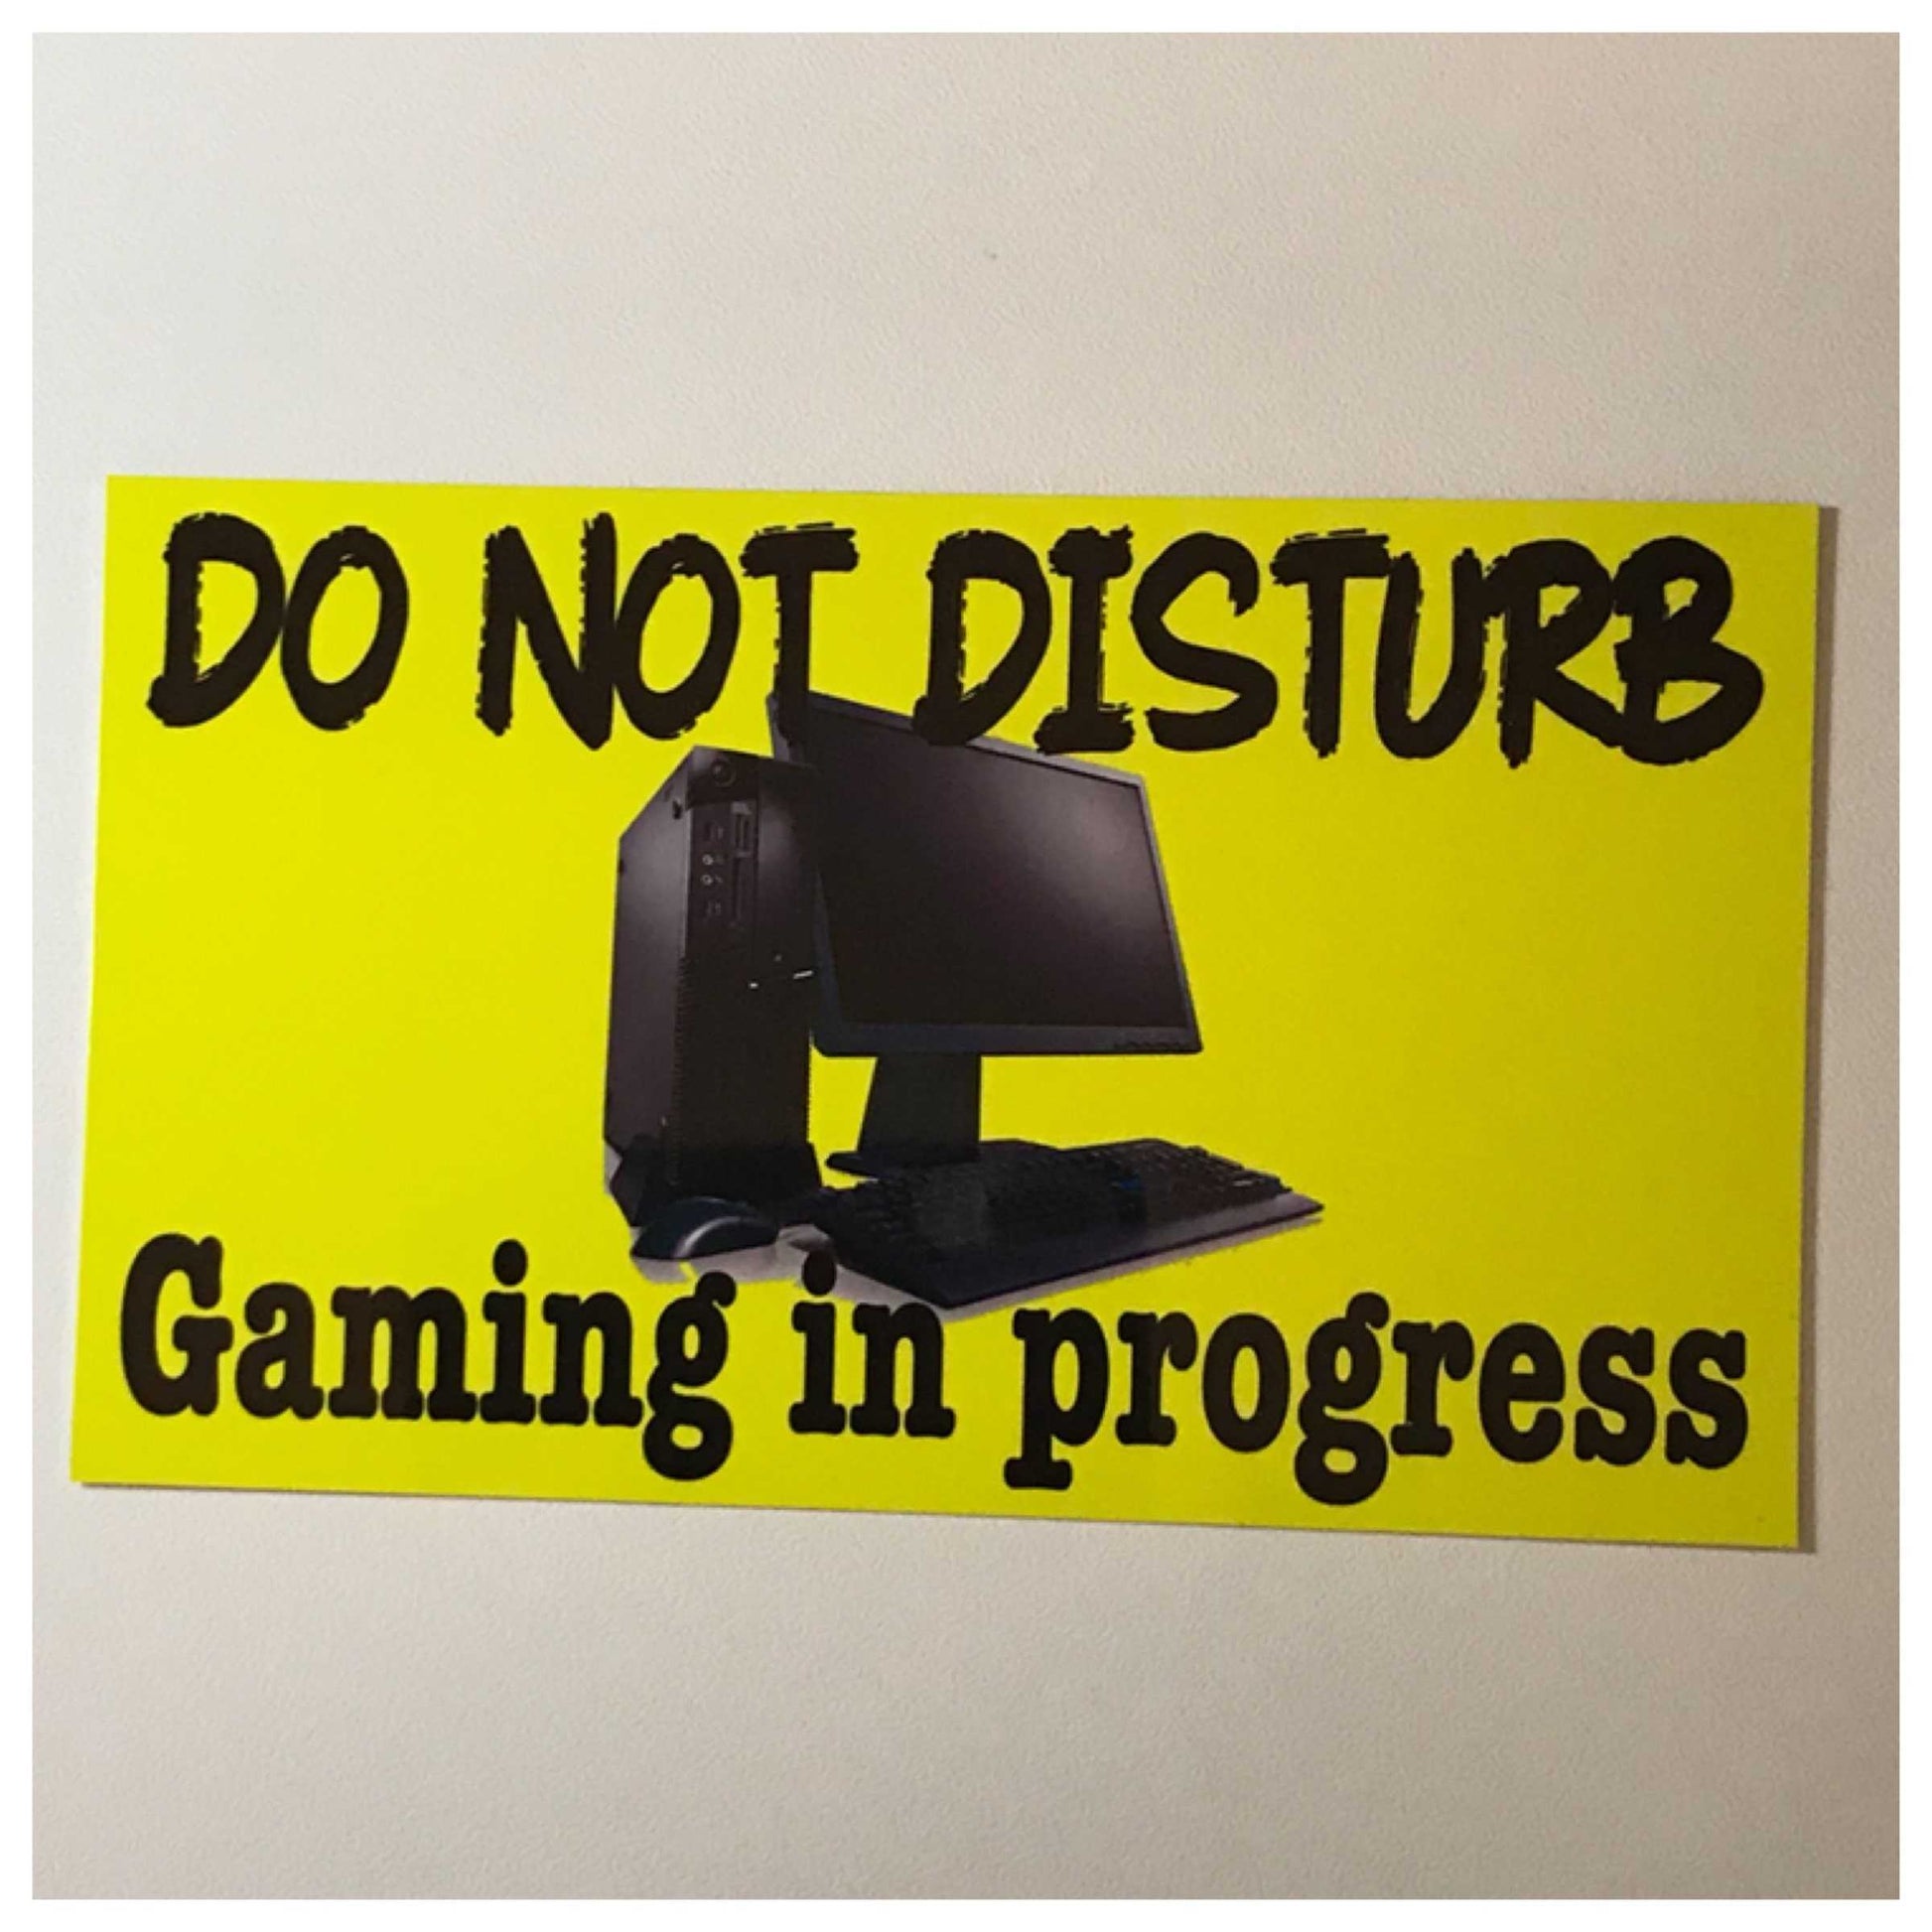 Computer Gaming In Progress Do Not Disturb Sign